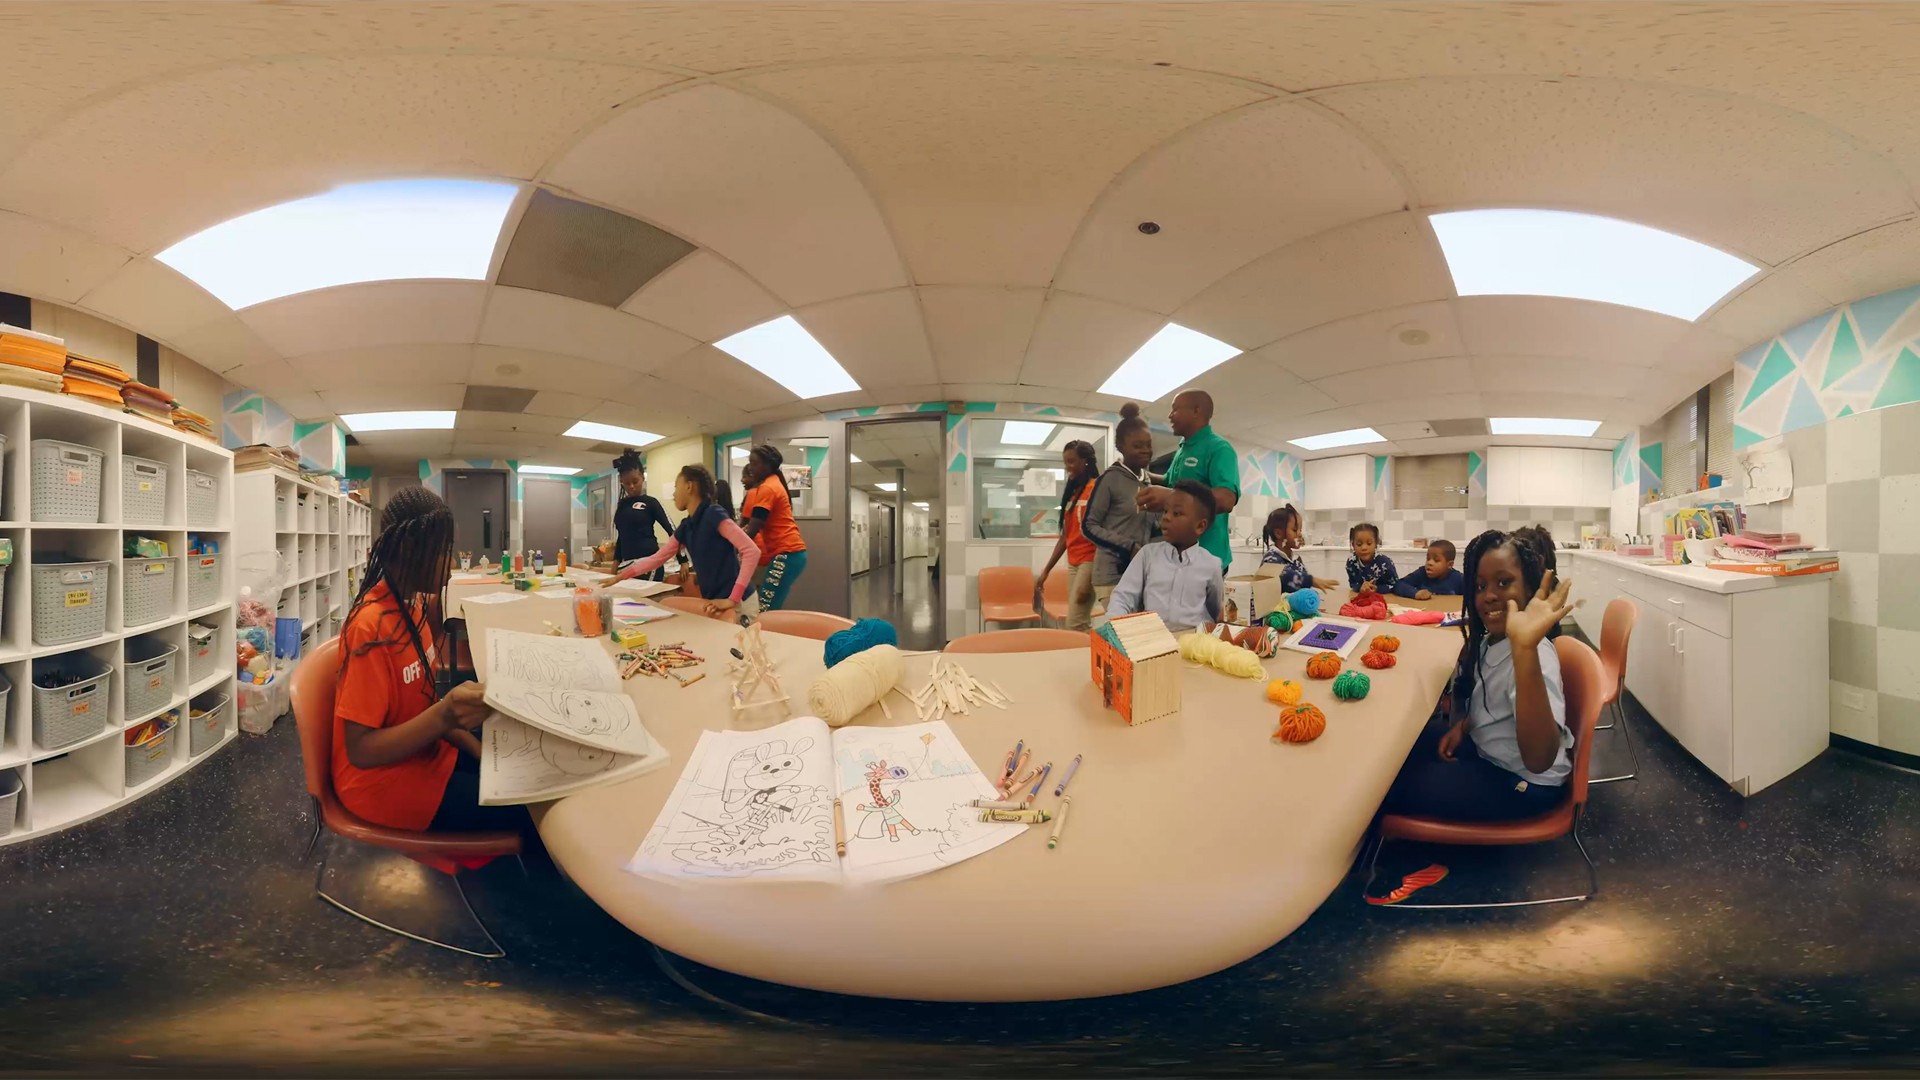 A VR shot of the interior of the Off The Street Club, little girl making drawing, supervisor watches